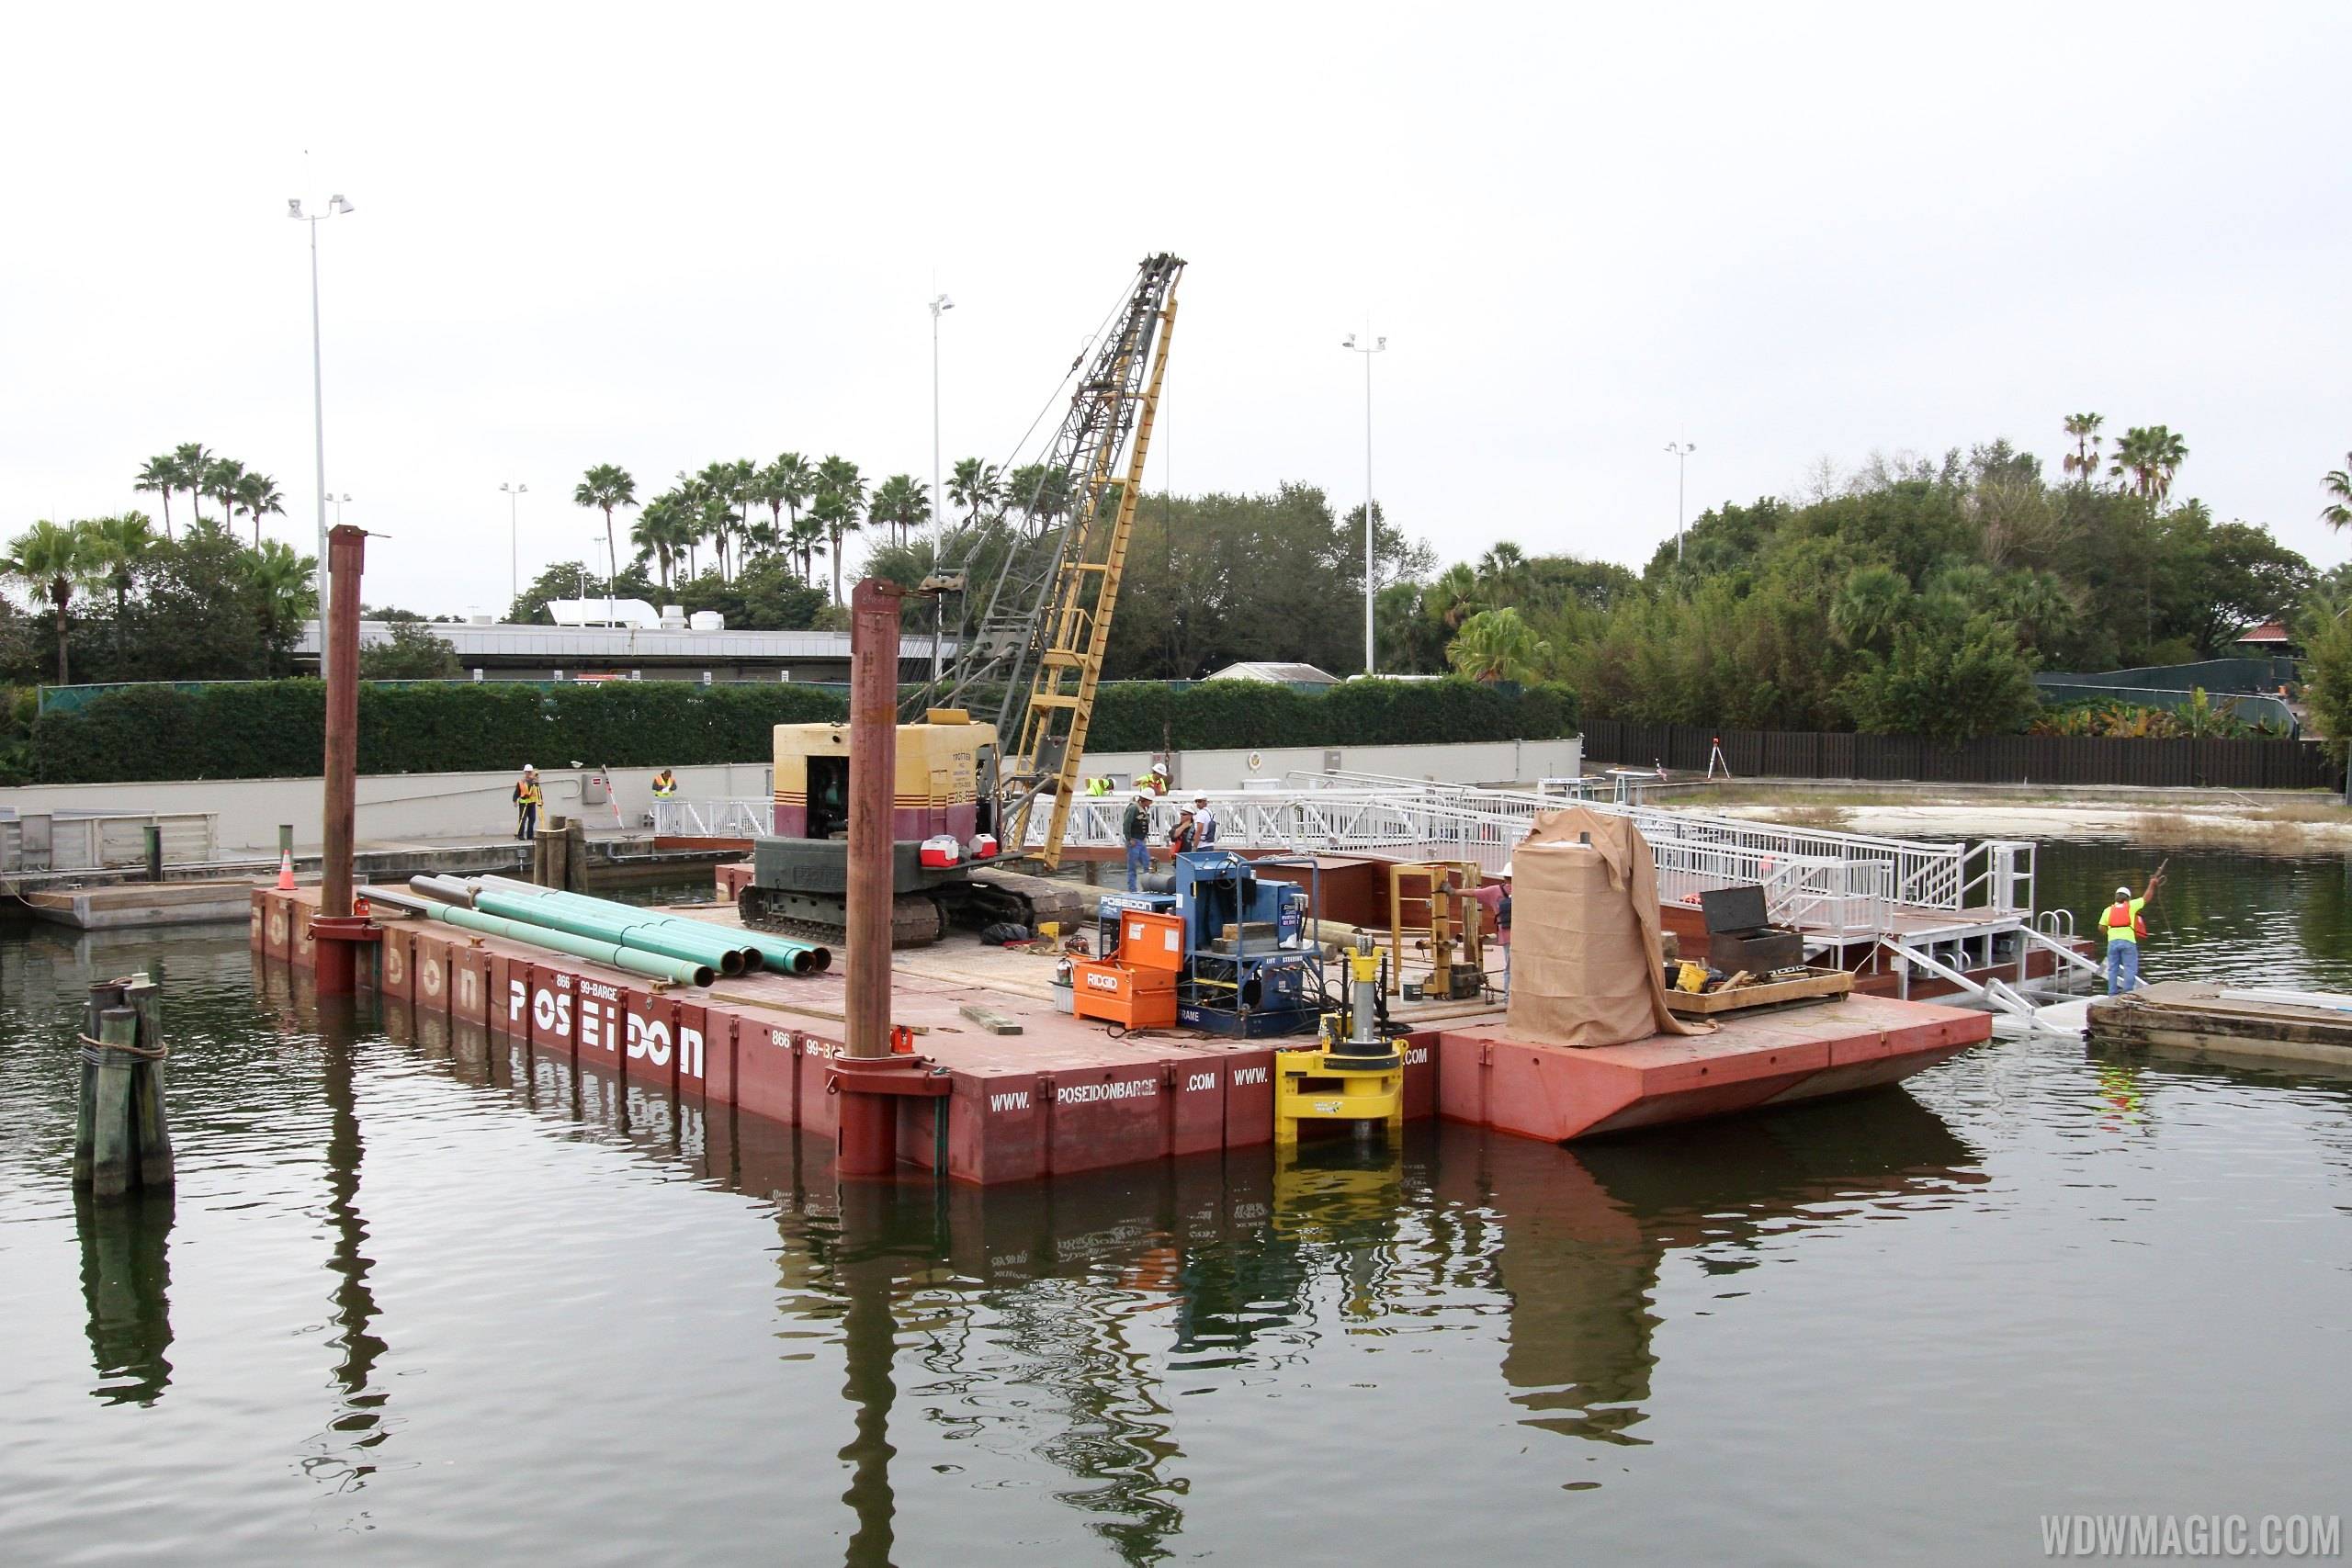 PHOTOS - Second Ferry boat loading dock under construction at the Transportation and Ticket Center